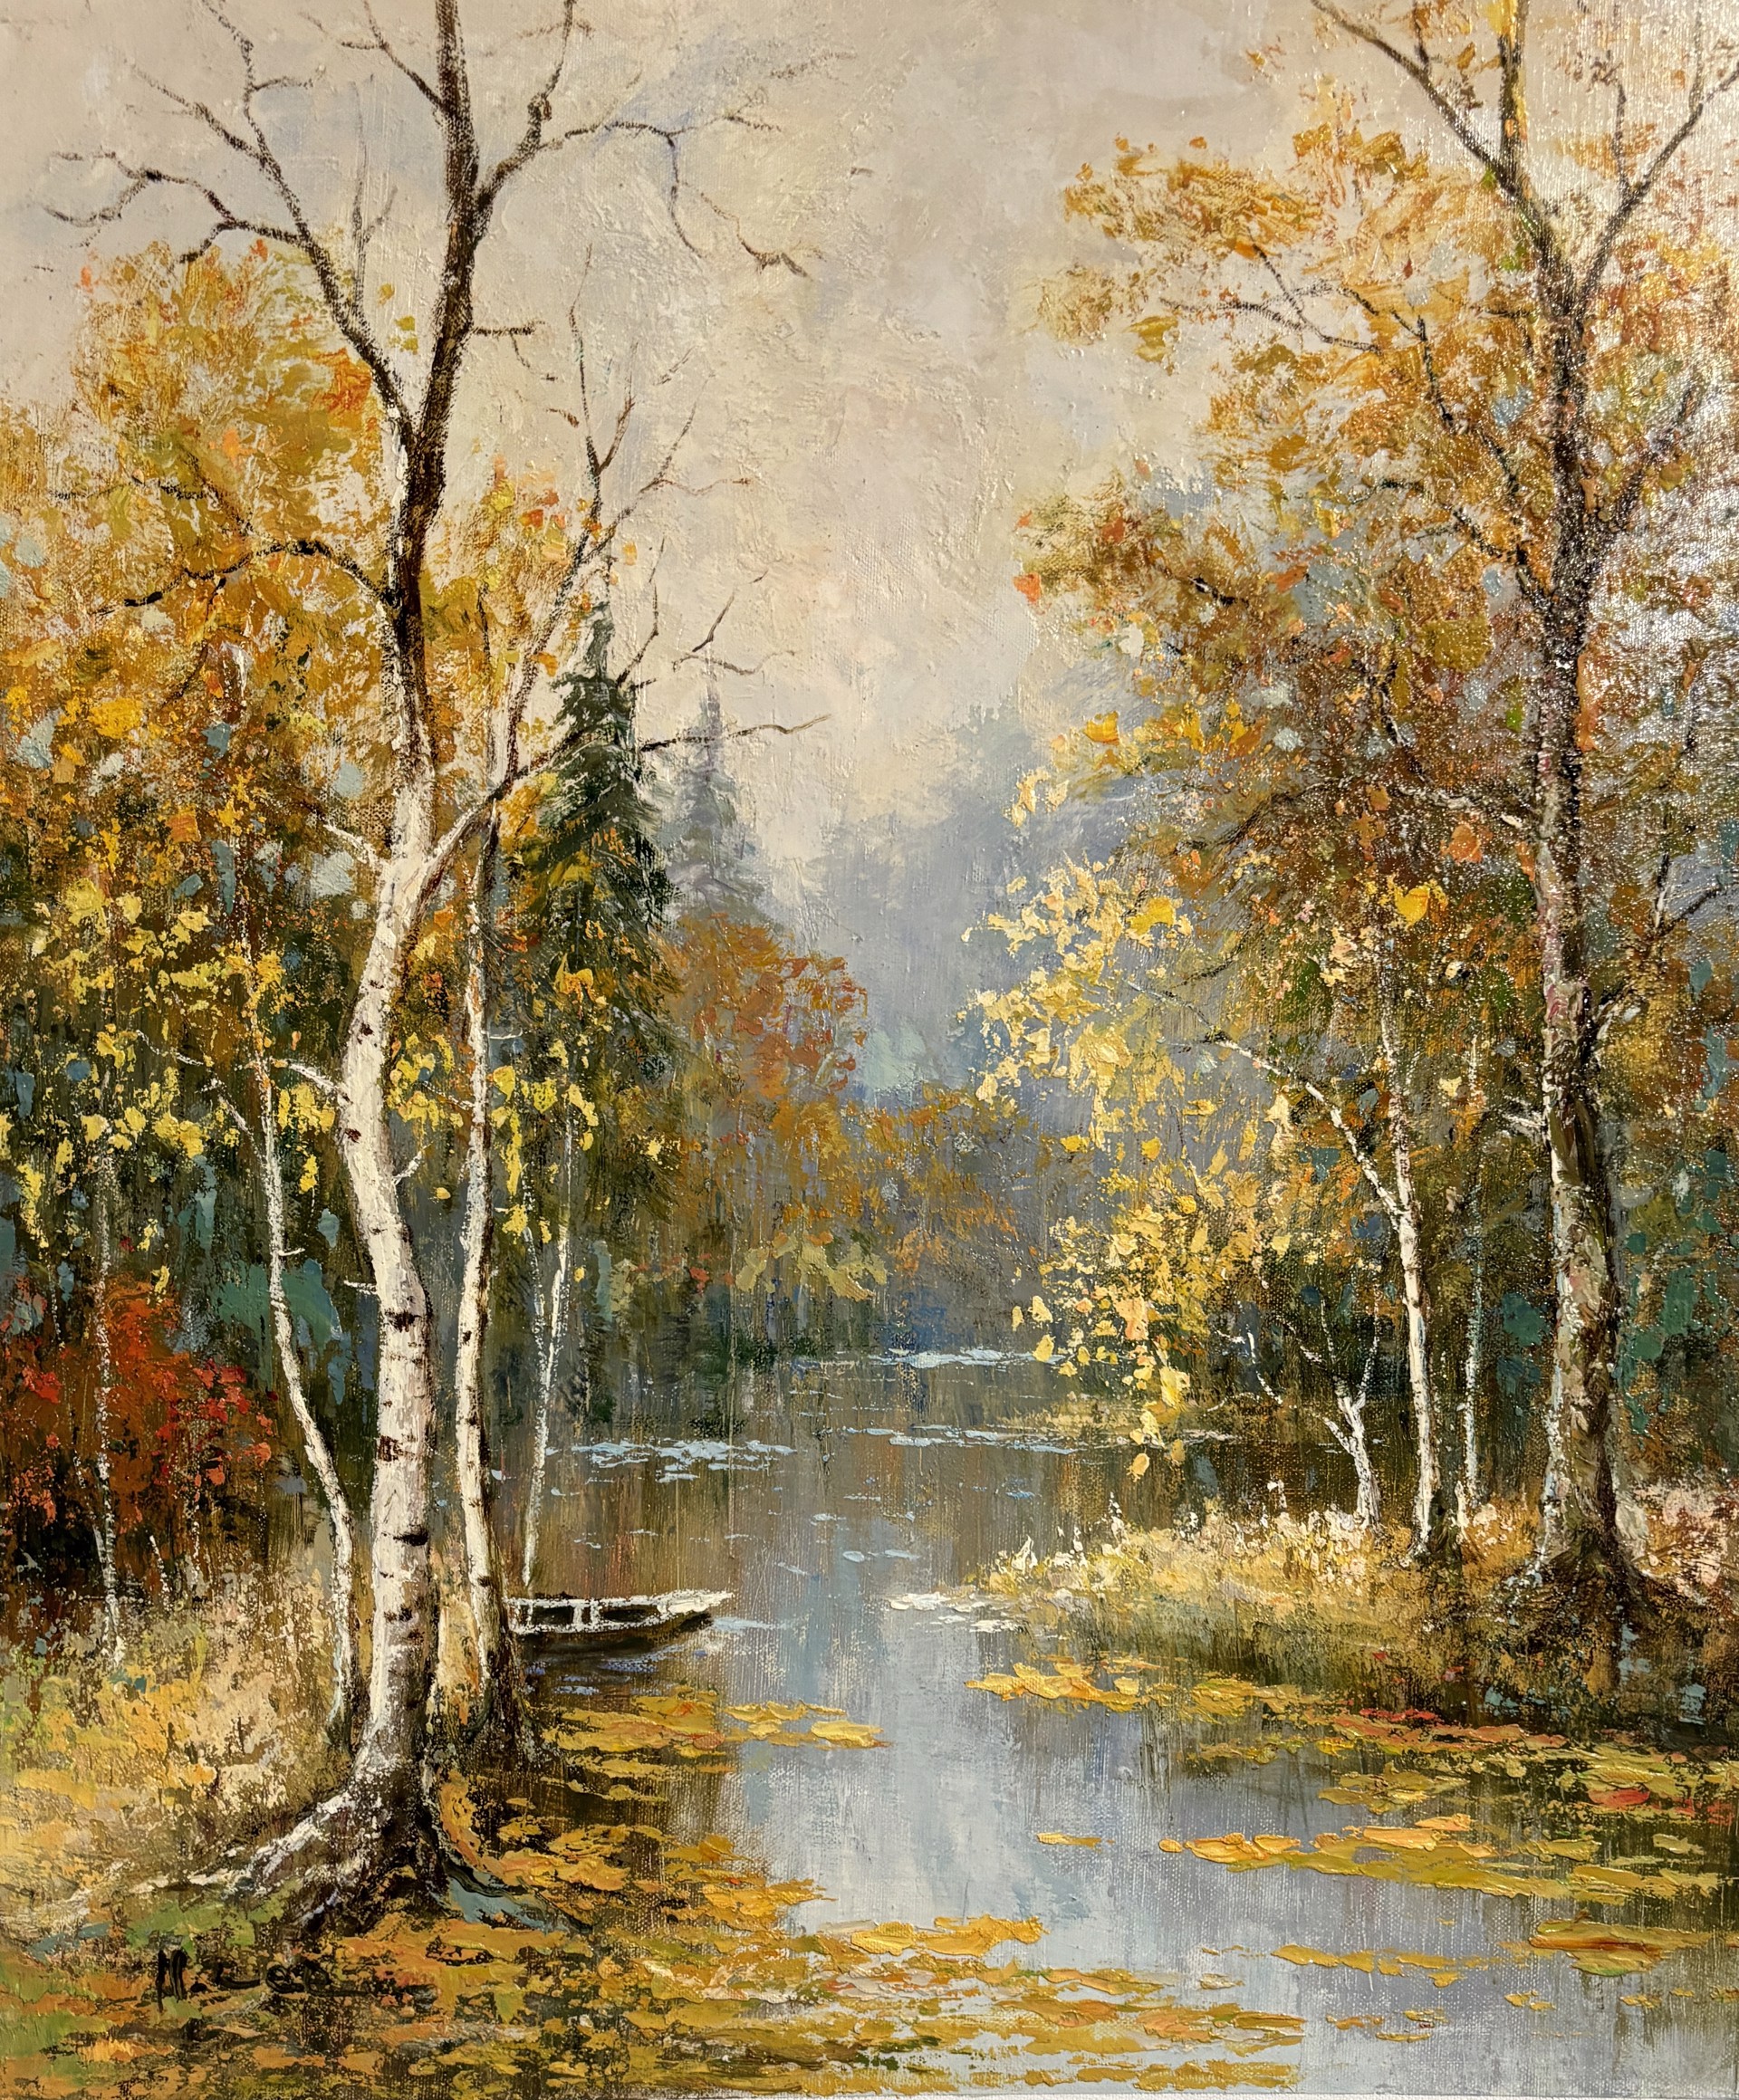 CANOE ON THE CREEKBANK by H LEE